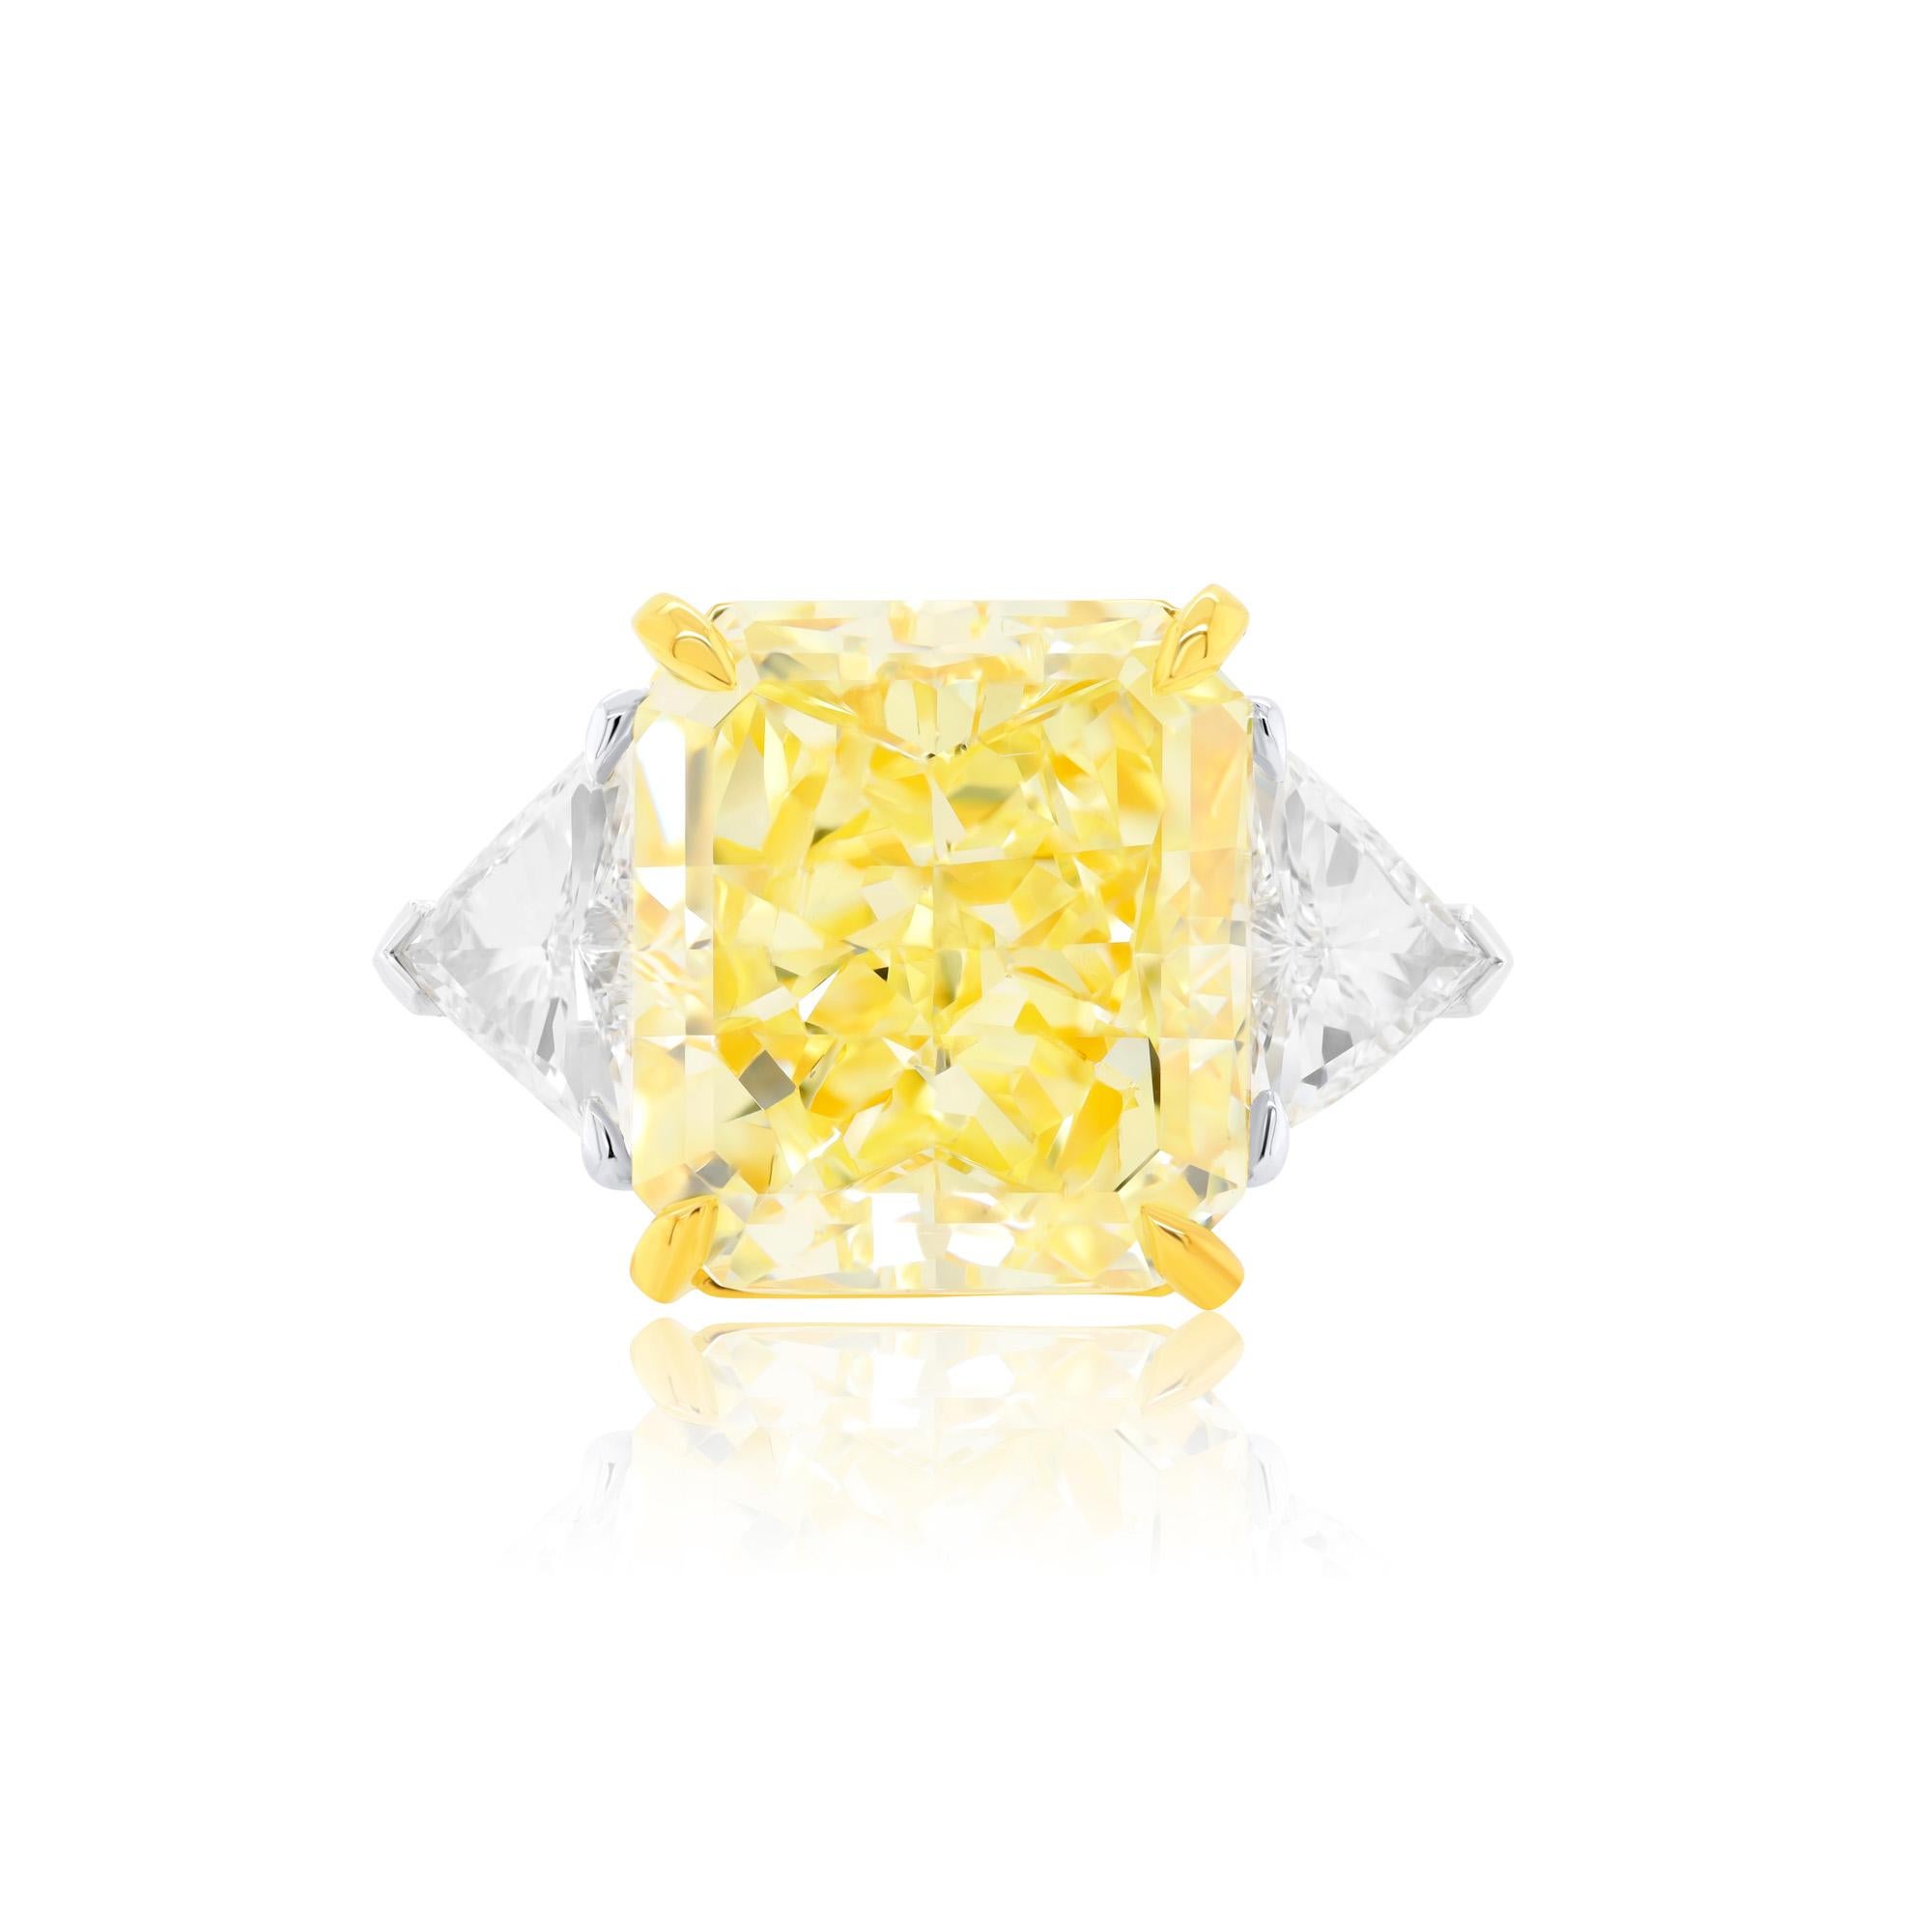 Stunning Platinum Fancy intese Yellow Diamond 25.88cts Adorned with 2 Trilliants on the Side GIA certified #5161984914
Diana M. is a leading supplier of top-quality fine jewelry for over 35 years.
Diana M is one-stop shop for all your jewelry